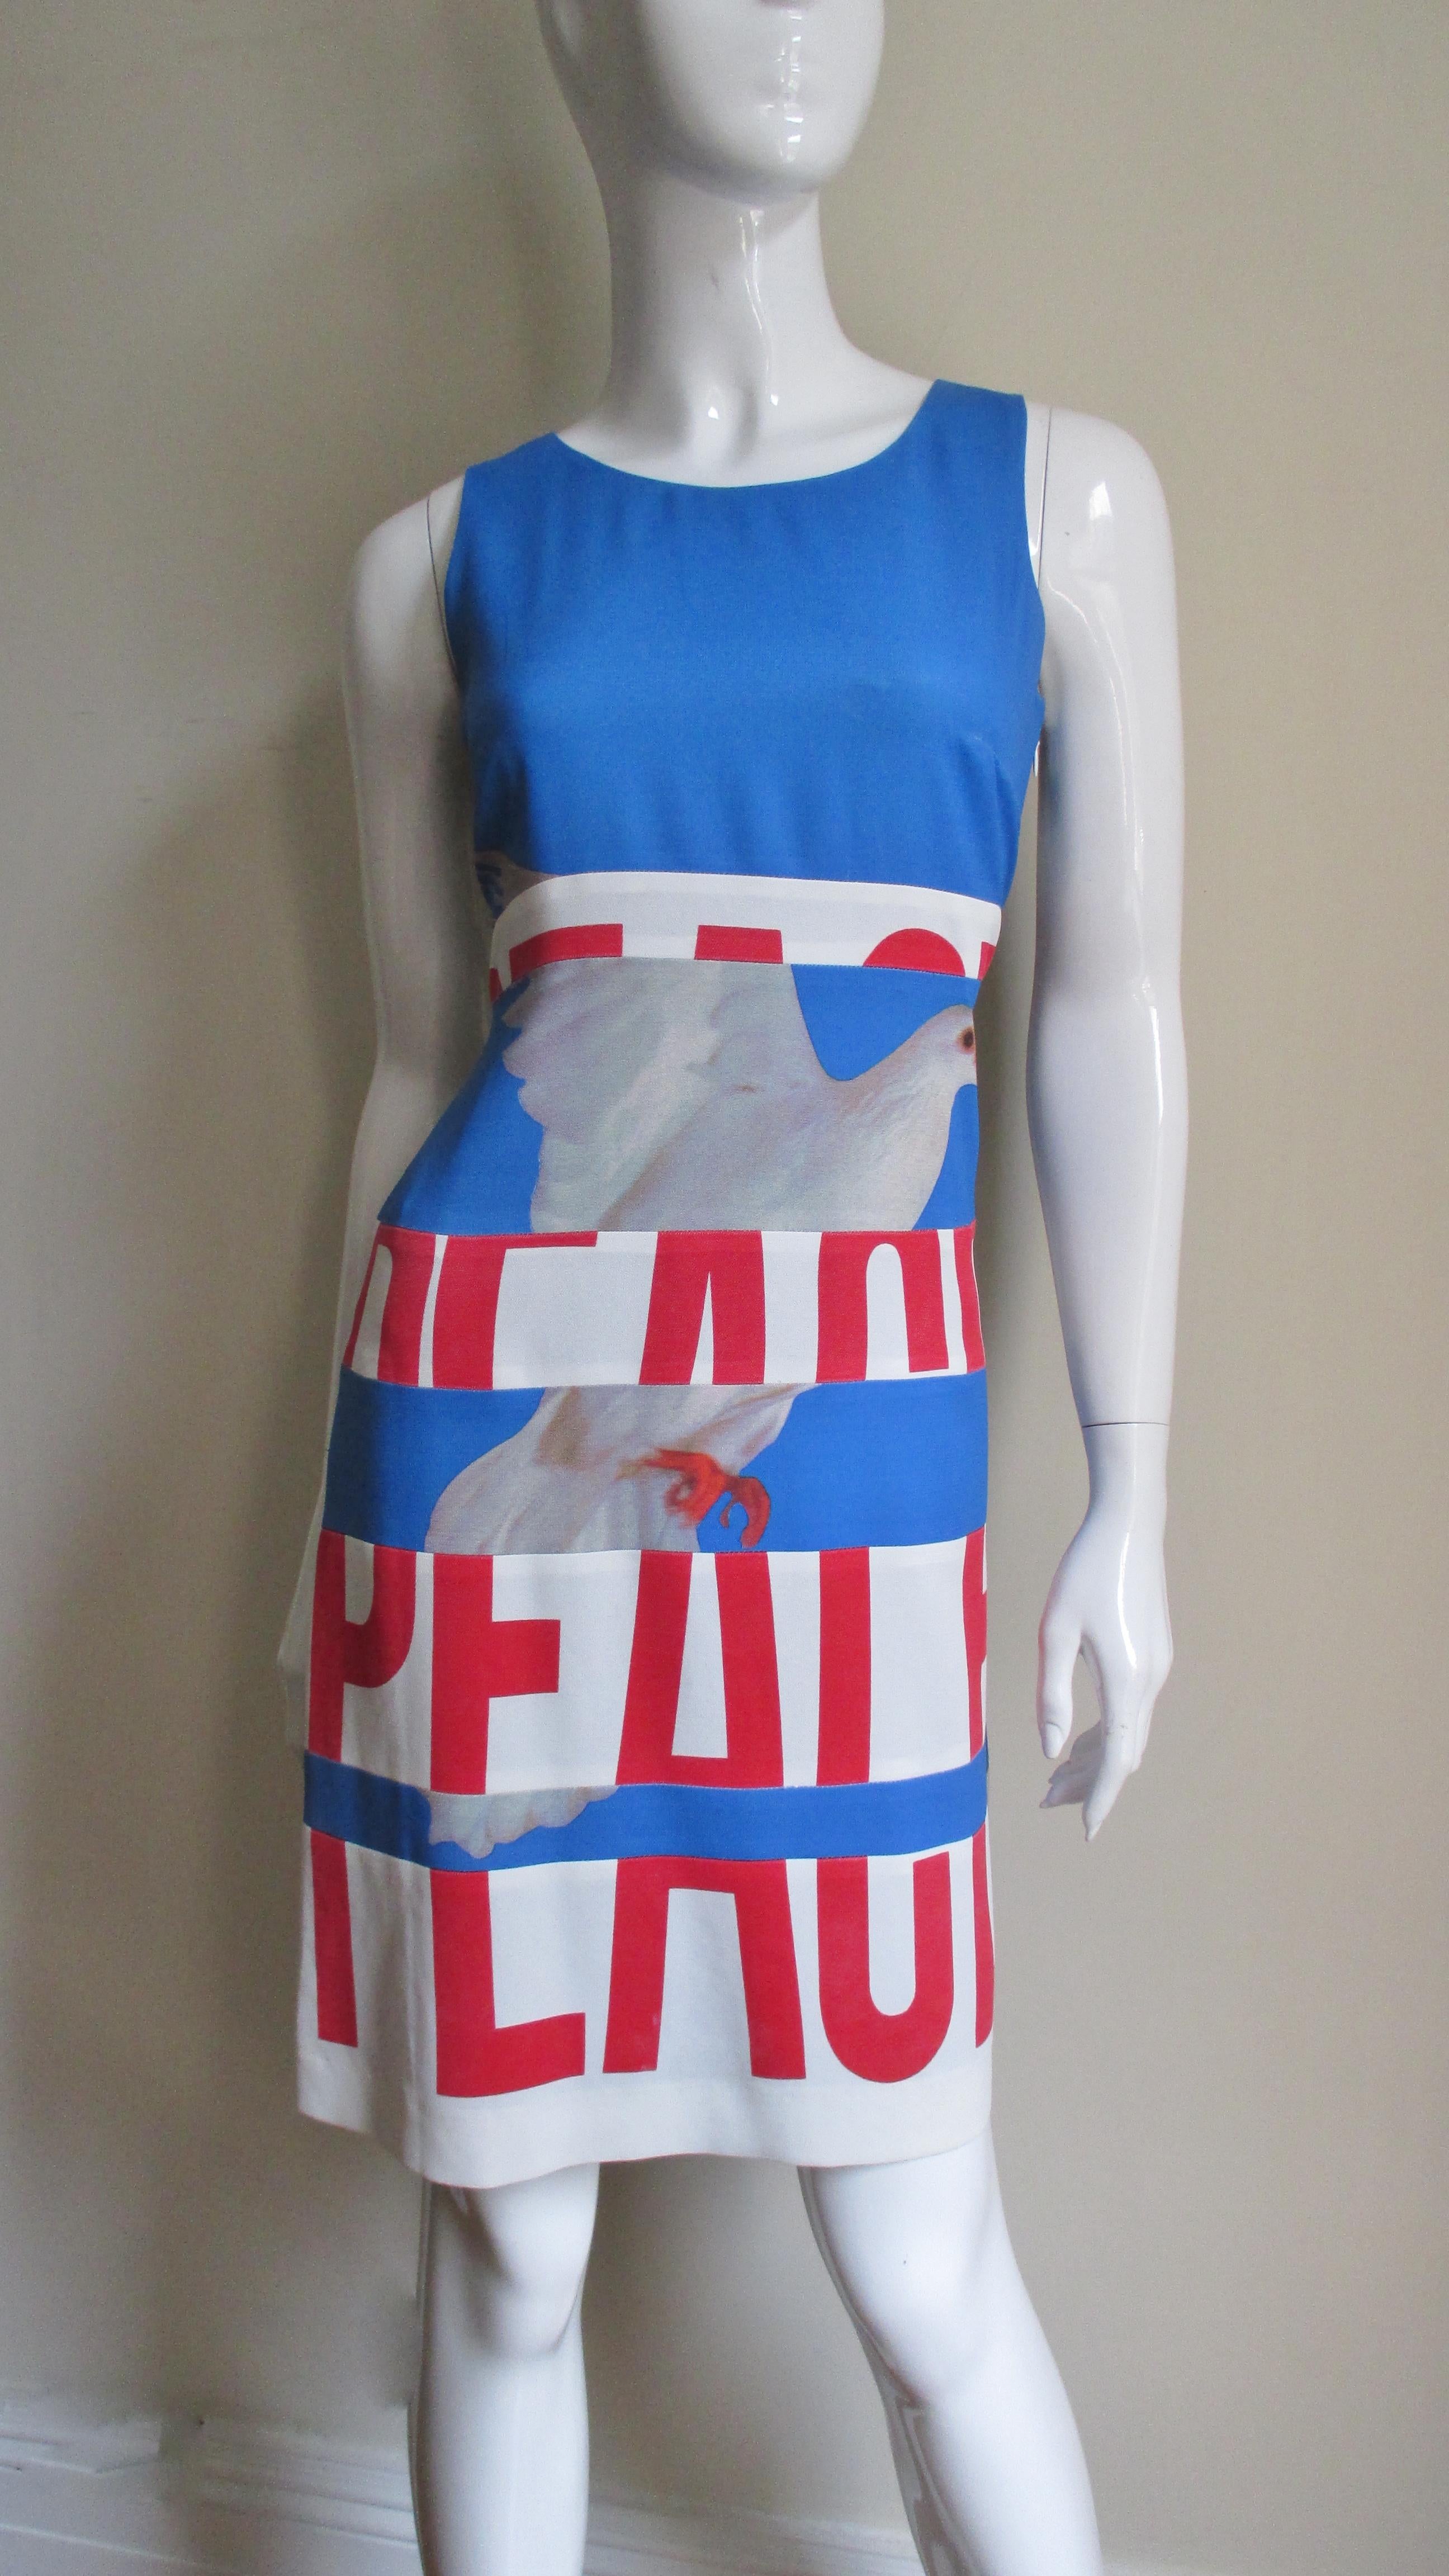 This is one of Moschino's most poignant dresses in bright blue emblazoned on the front in large red letters the word 